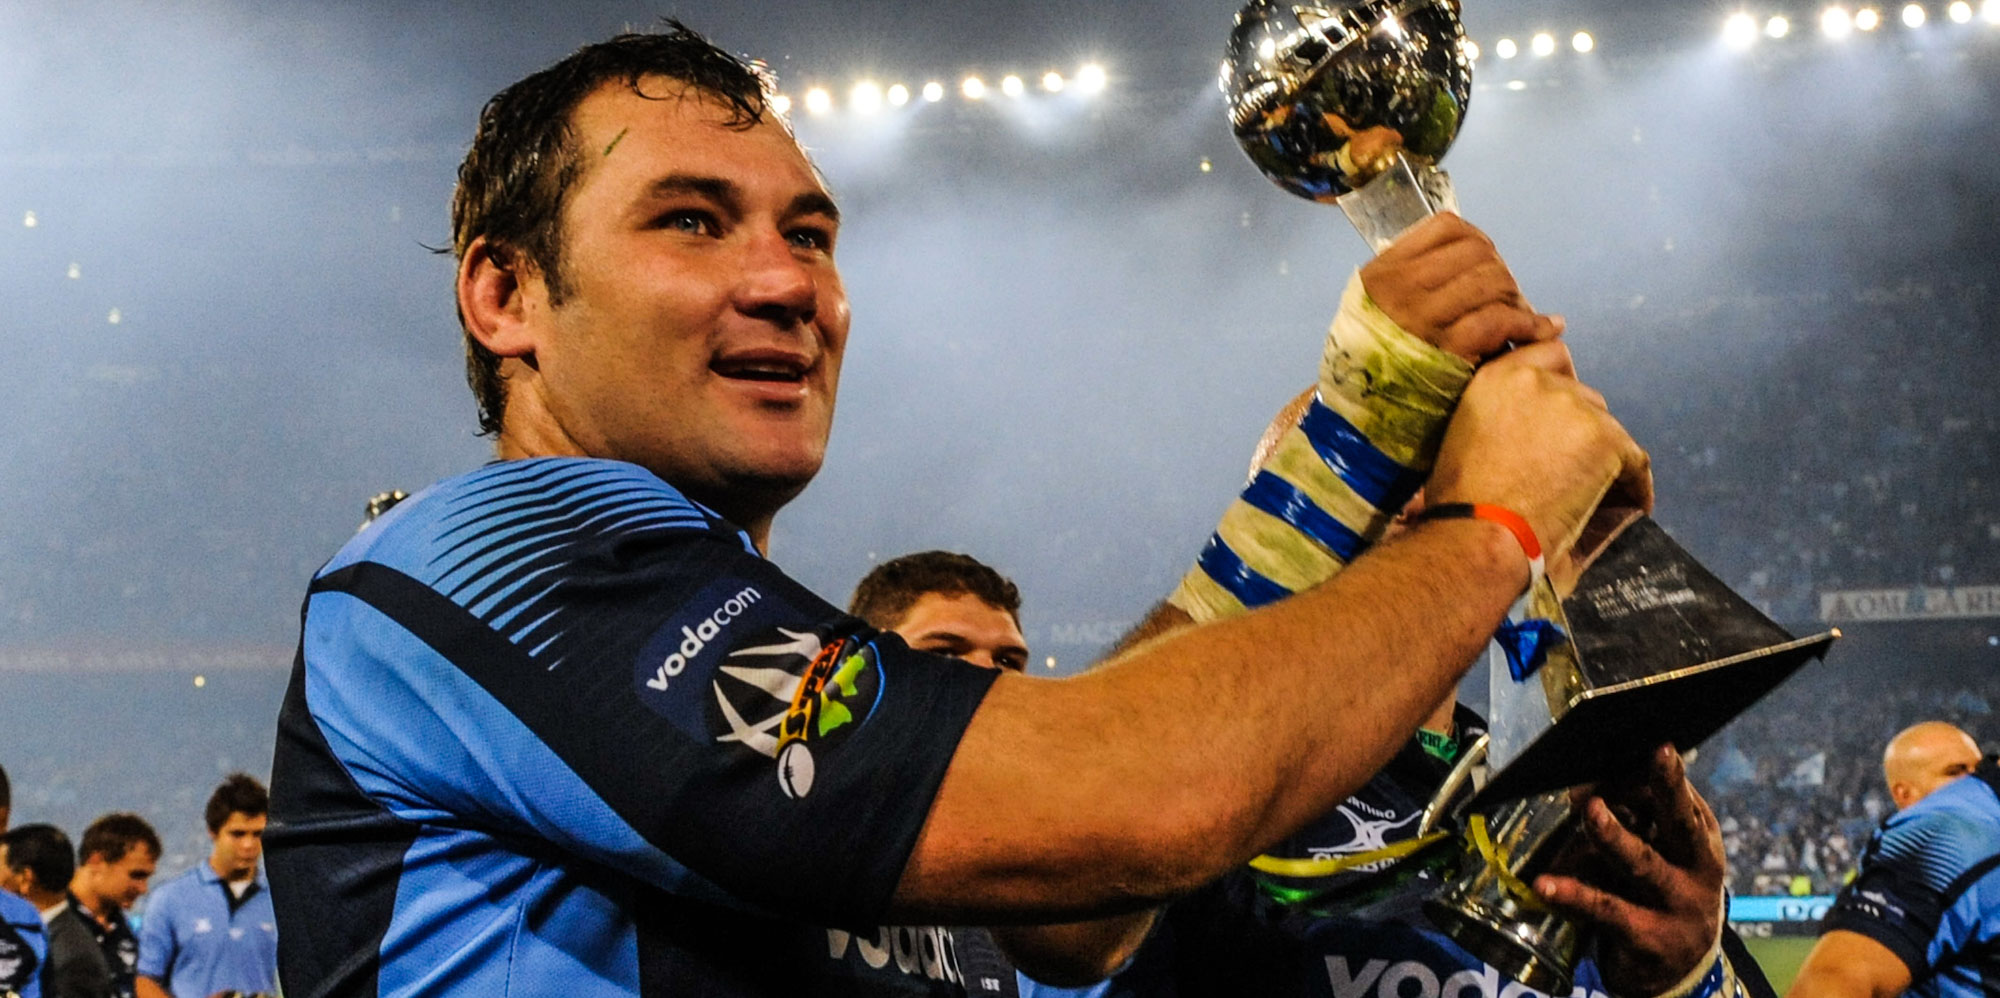 Wannenburg was a member of the Vodacom Bulls team that won Vodacom Super Rugby in 2007, 2009 and 2010.